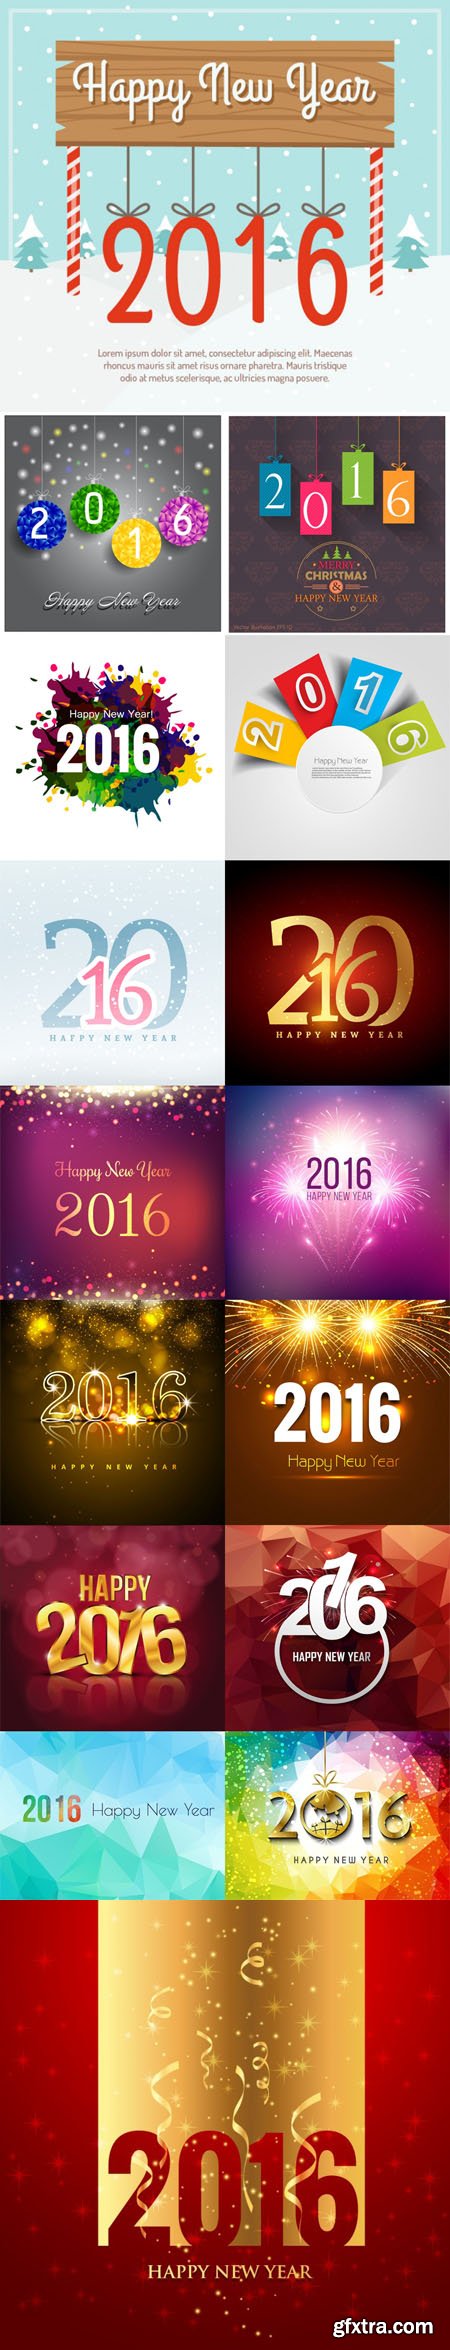 2016 New Year Backgrounds Vector [Vol.1]